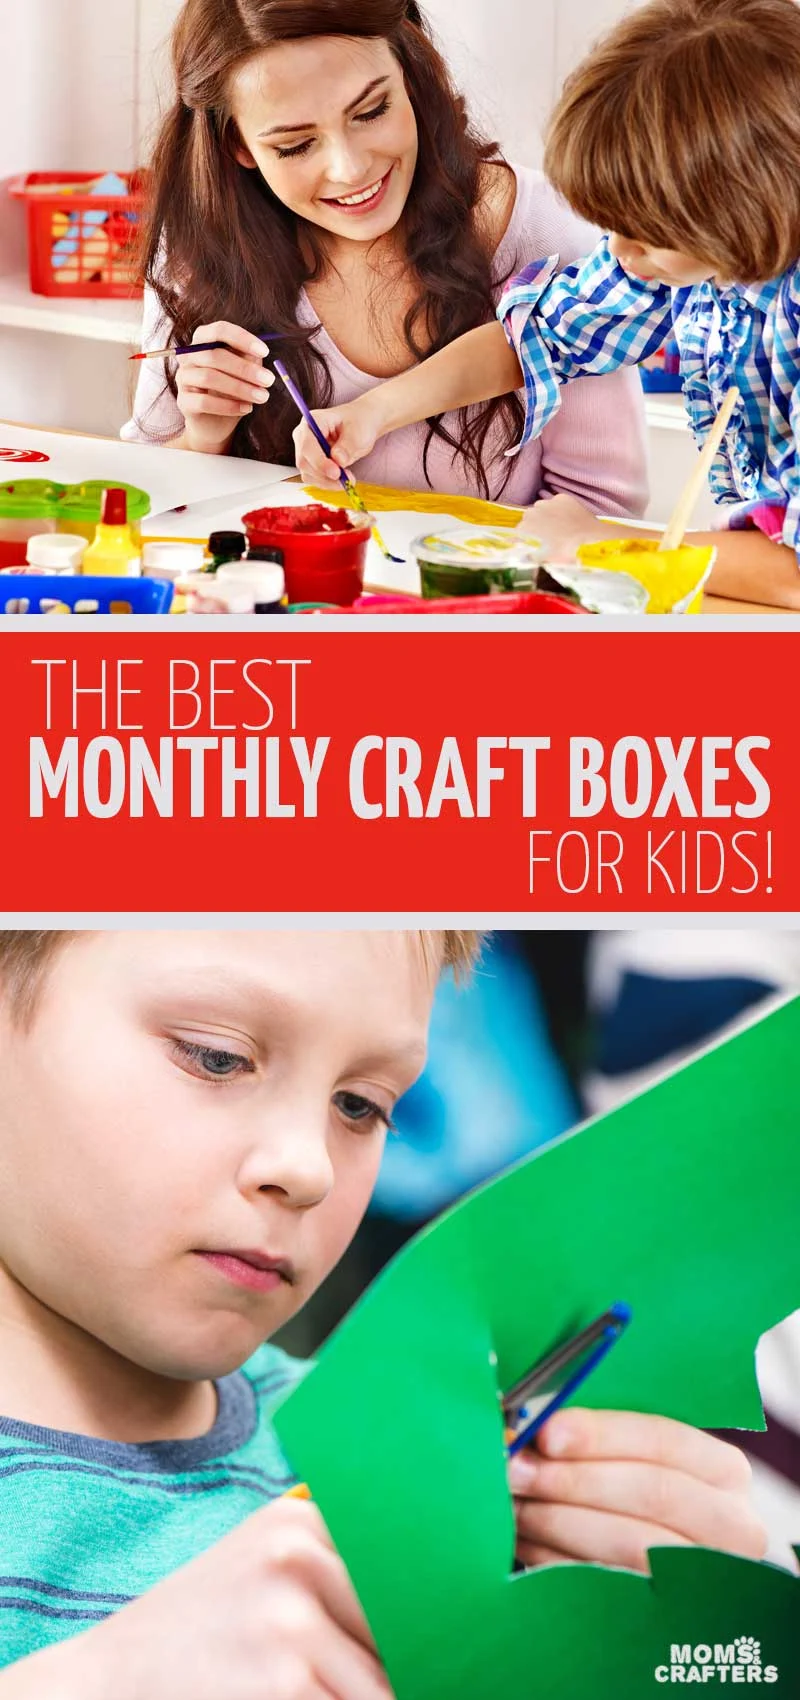 Click for the ultimate list of the best craft subscription boxes for kids and teens as written up by a professional crafter! These are great gifts for crafty kids who love to be creative, adn a great way to do weekend crafting activities as a family.